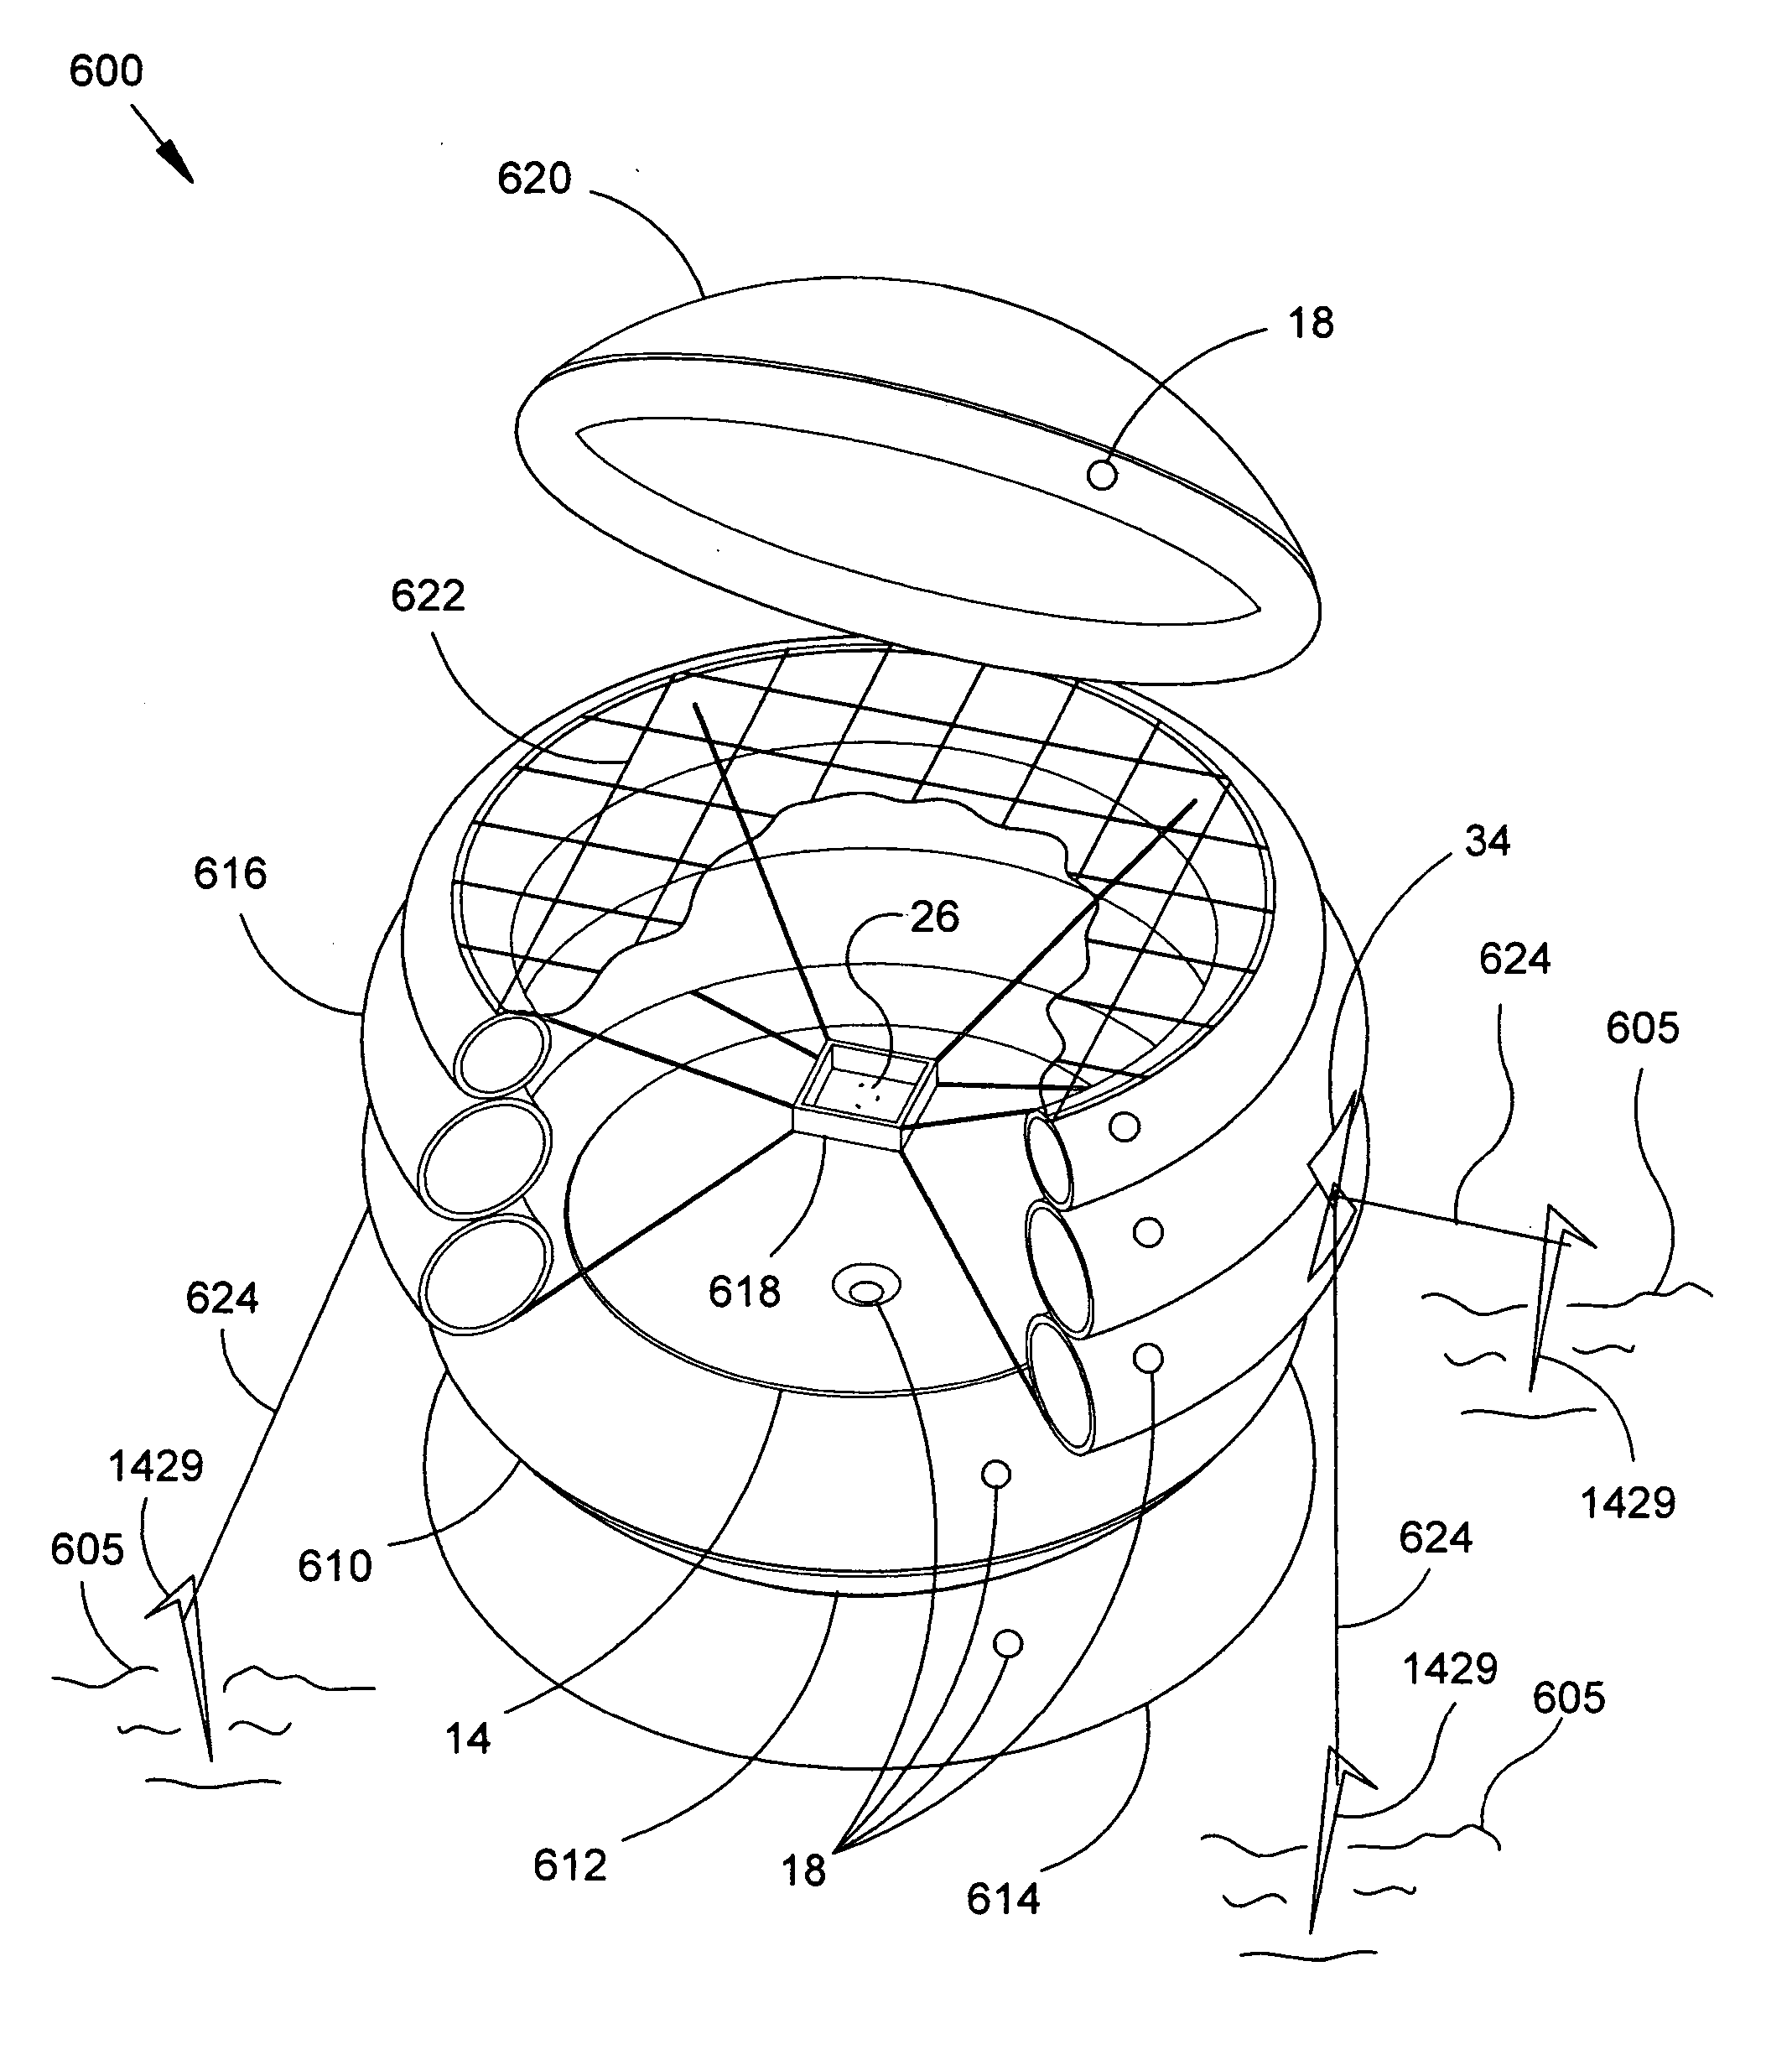 Multi-function field-deployable resource harnessing apparatus and methods of manufacture